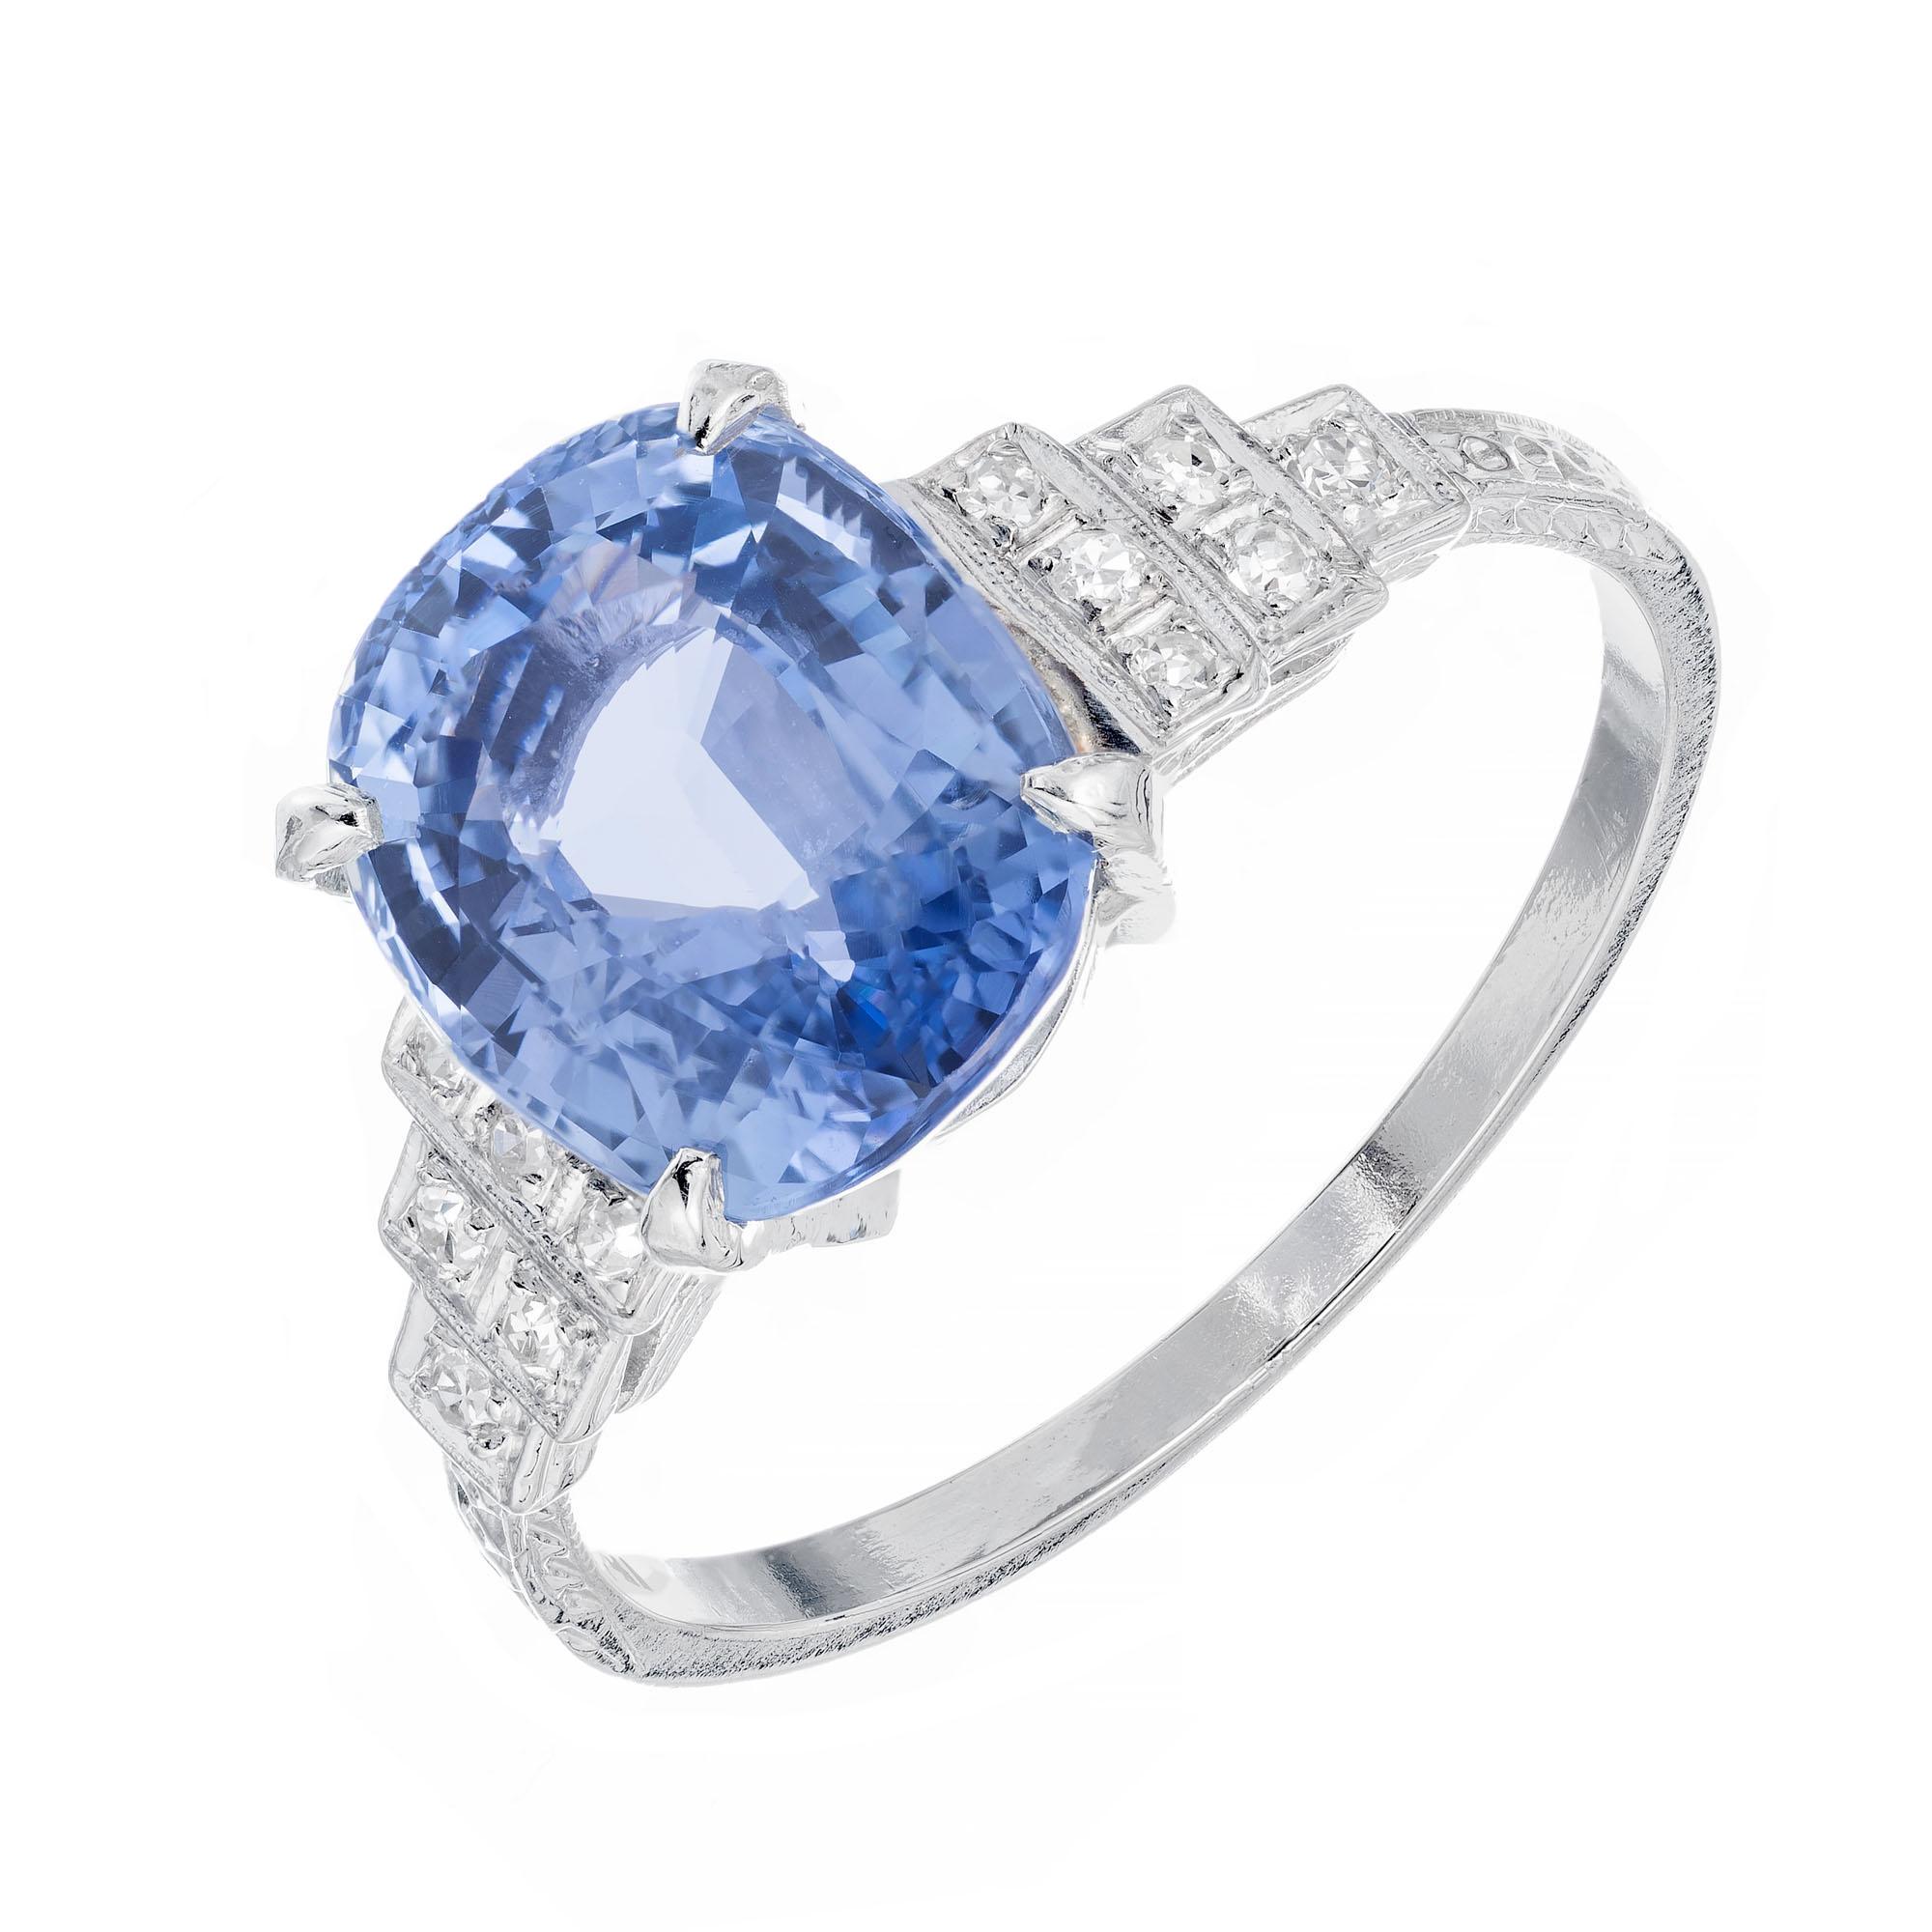 Periwinkle blue sapphire and diamond engagement ring. GIA certified oval natural no heat untreated sapphire in its original 1920’s Art Deco platinum setting with 12 single cut accent diamonds.  

1 oval 10.89 x 9.05 x 5.20mm periwinkle blue sapphire